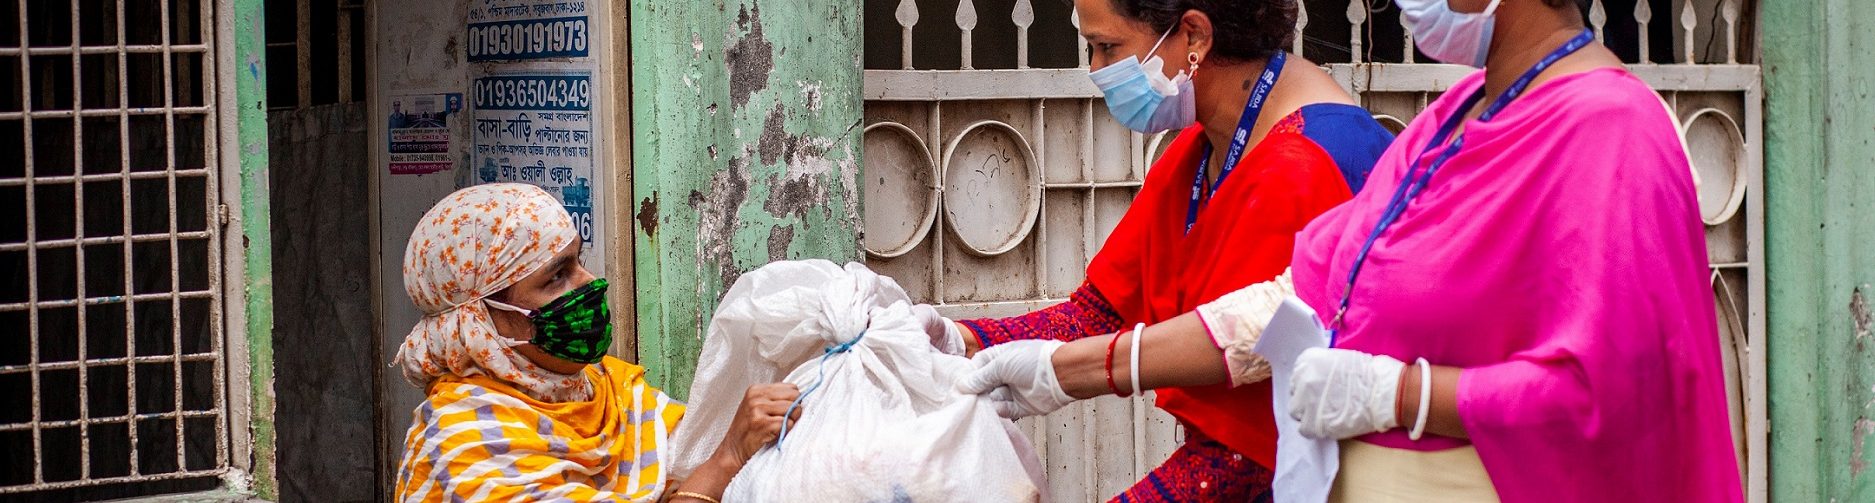 A Major Food Transfer Program in Bangladesh Fell Short During the COVID-19 Pandemic